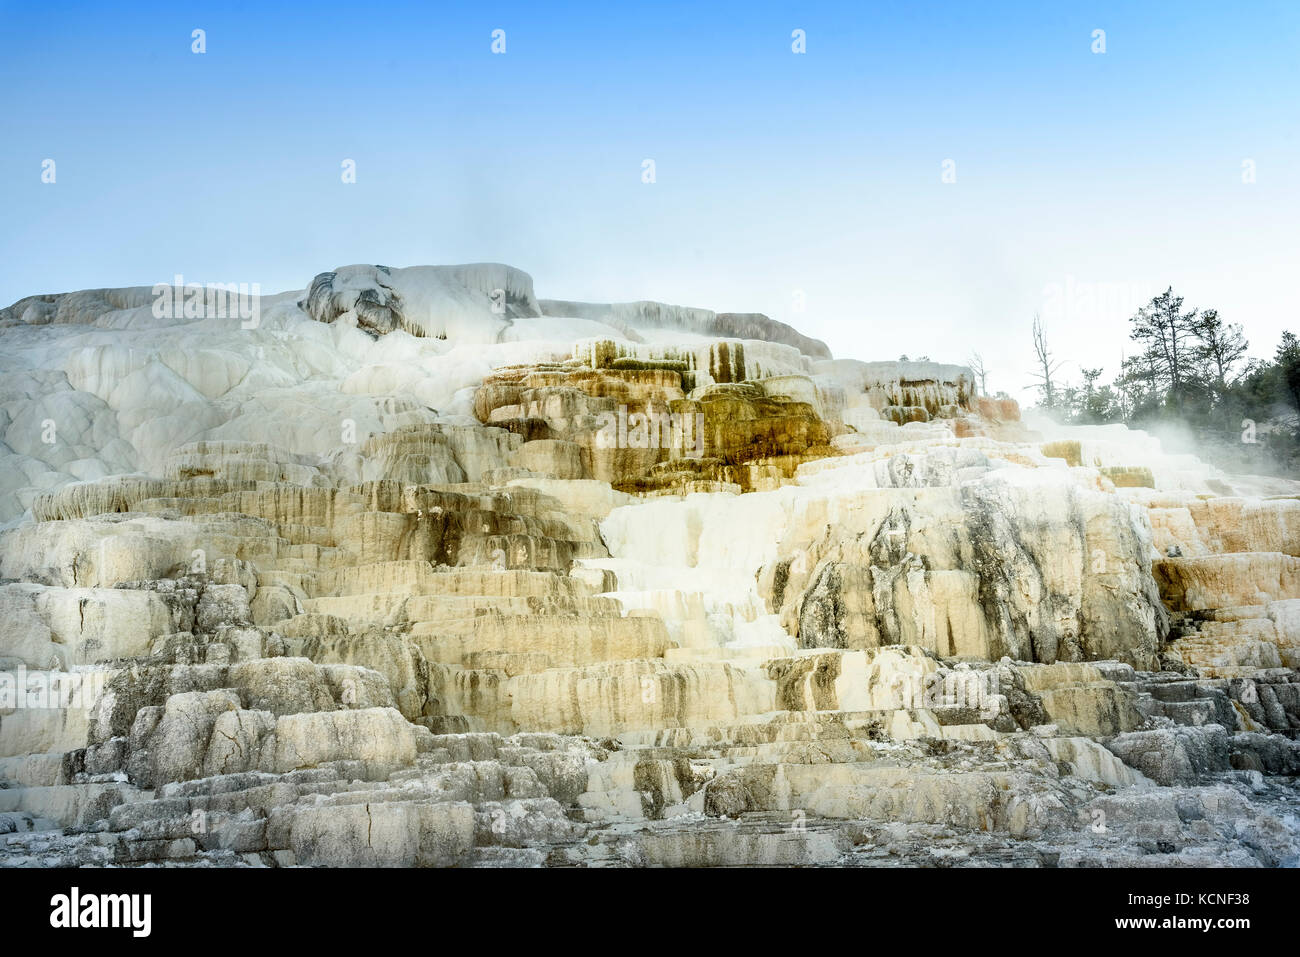 Iconic dampfende geothermische Feature bei Mammoth Hot Springs im Yellowstone National Park Stockfoto